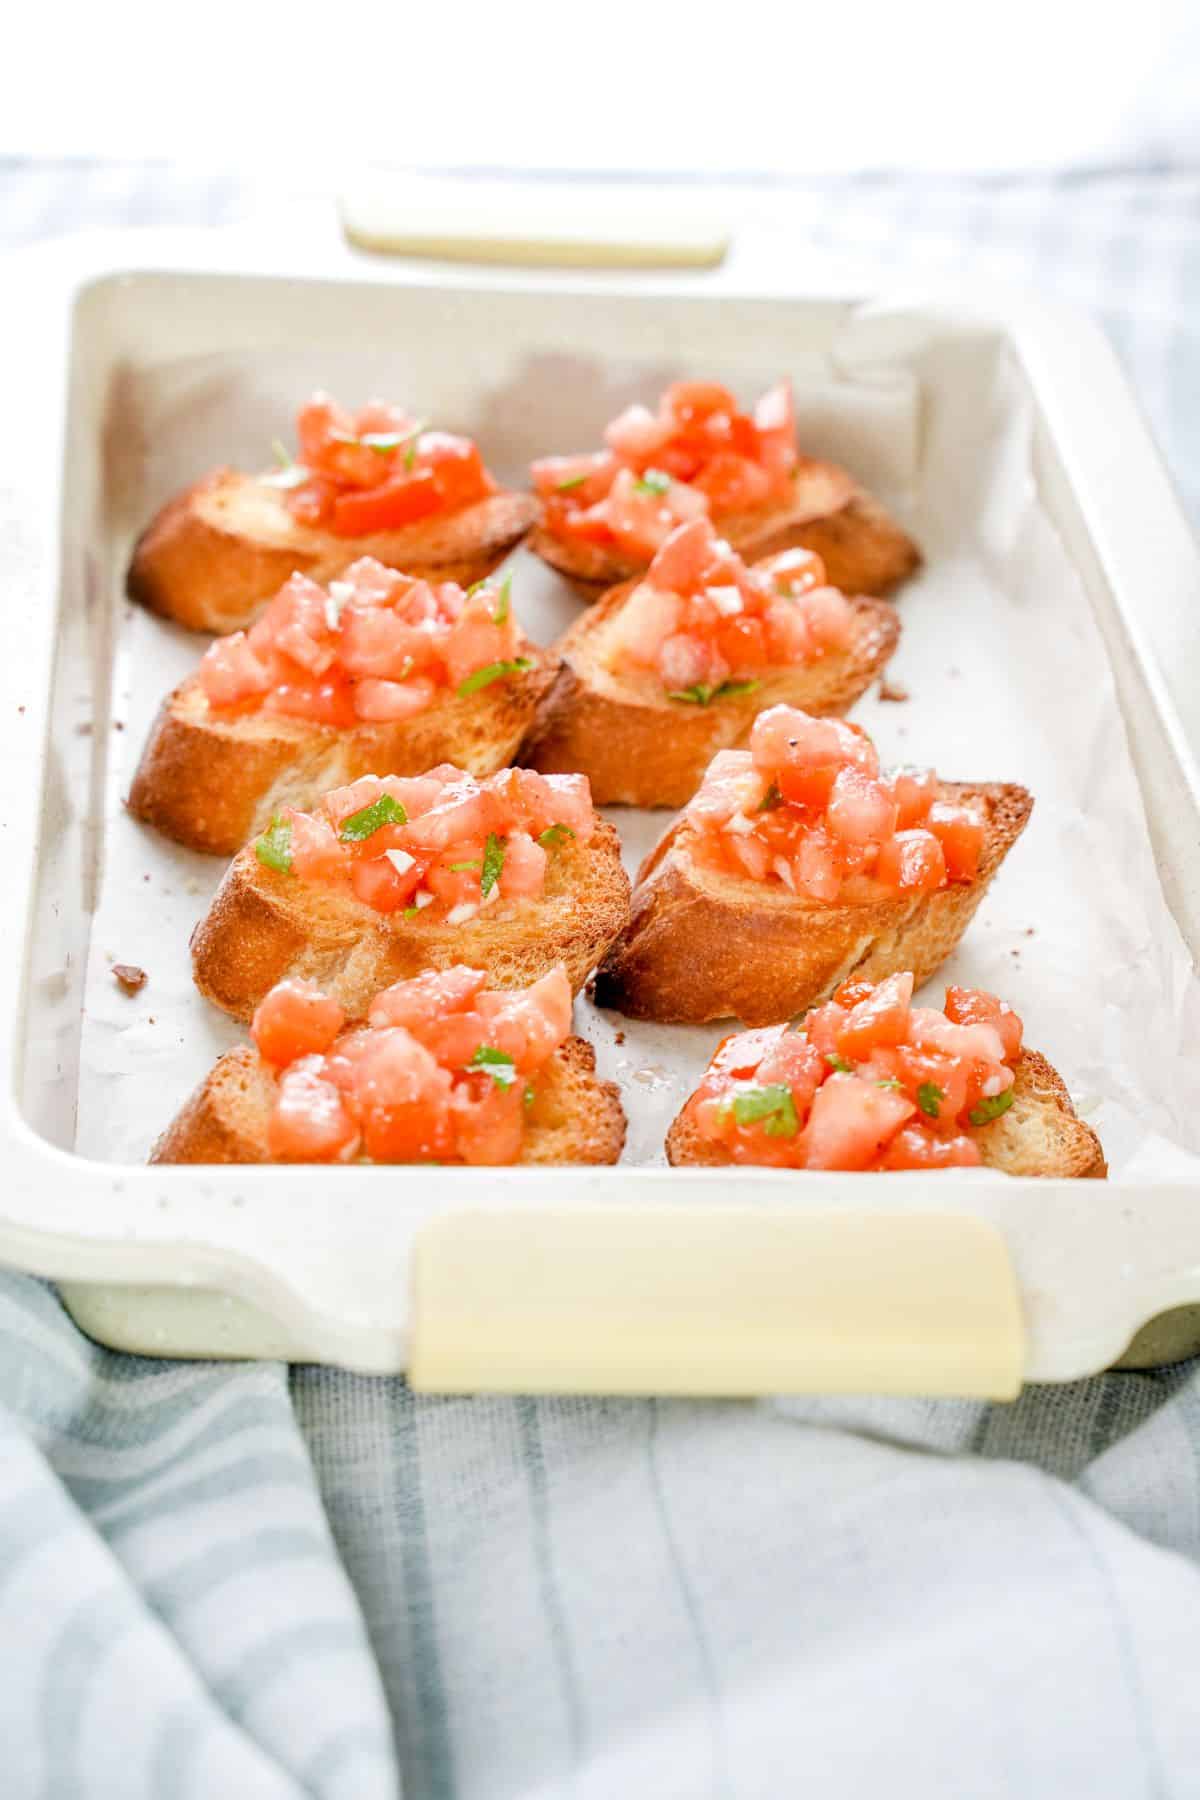 white baking dish filled with bruschetta sitting on gray towel